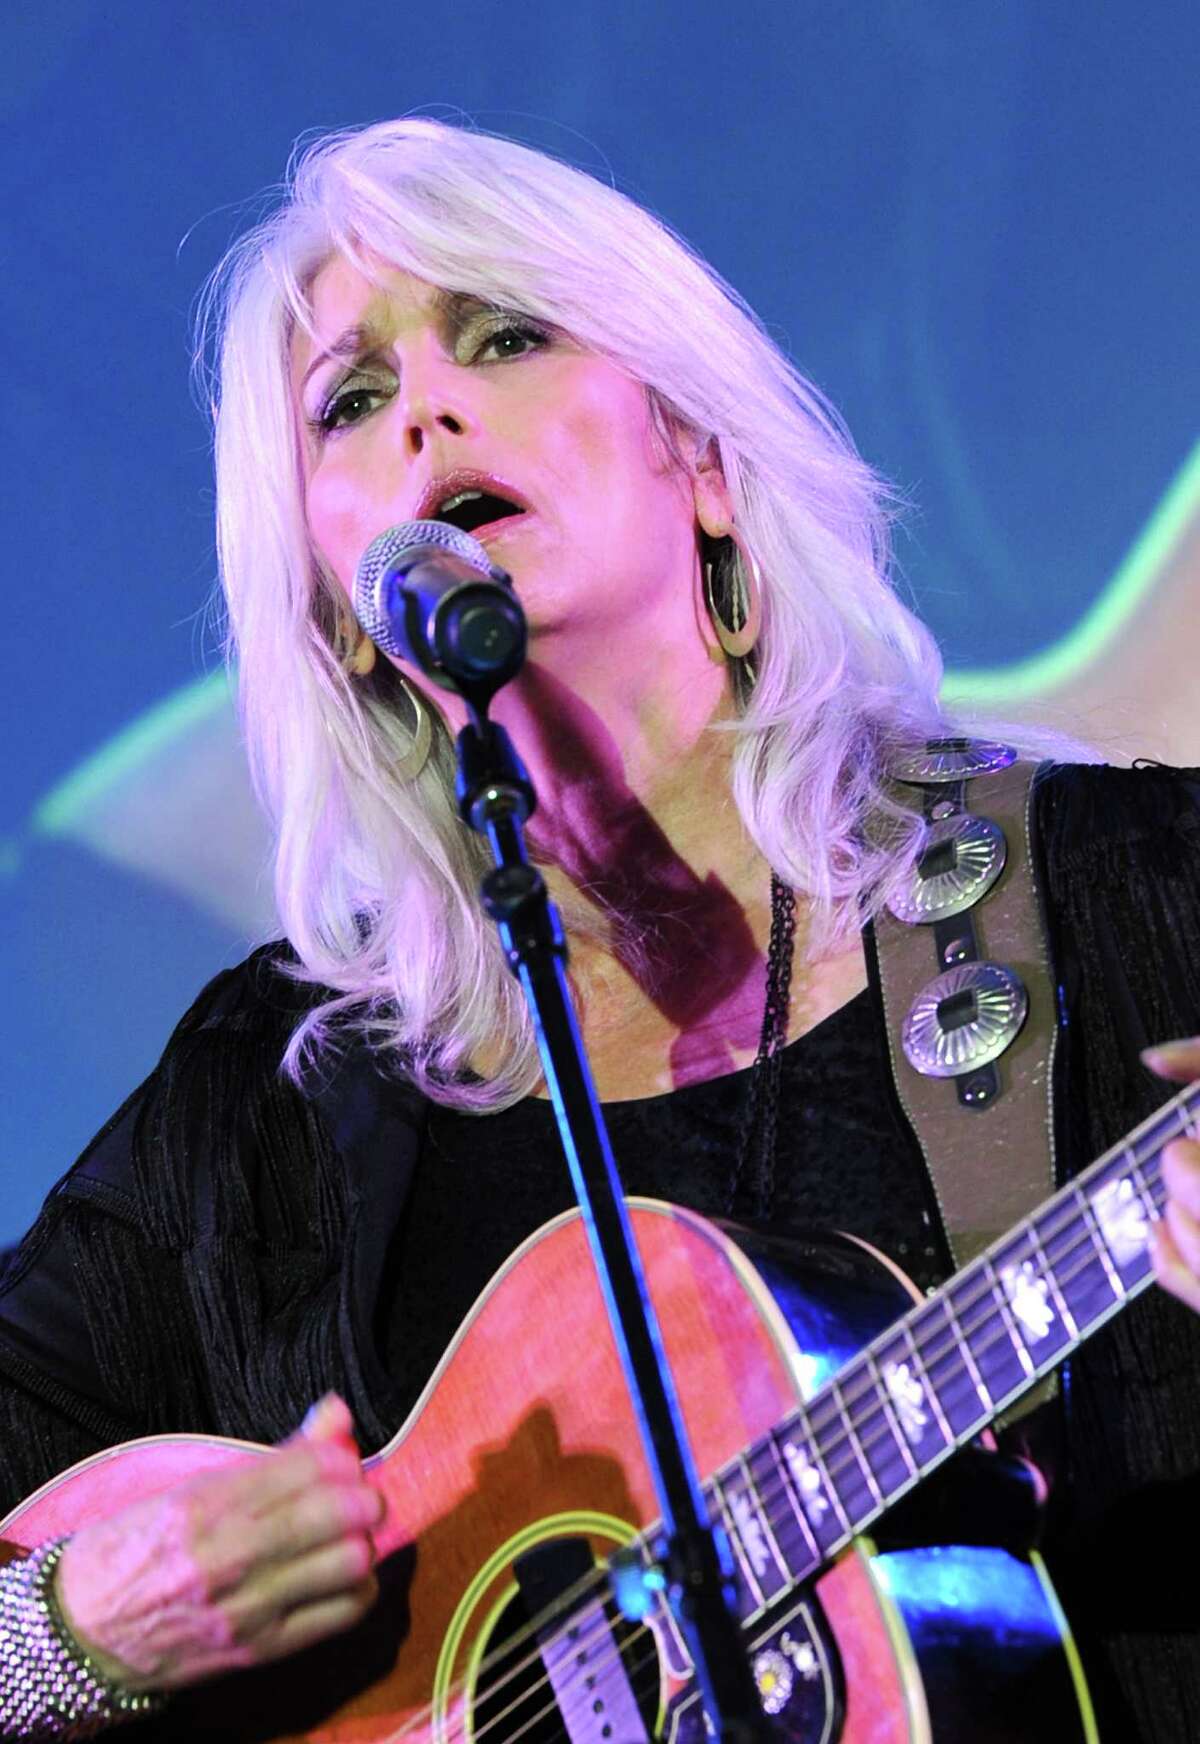 NASHVILLE, TN - MARCH 26: Emmylou Harris performs at the TJ Martell Honors Gala, Nashville at Hutton Hotel on March 26, 2012 in Nashville, Tennessee.